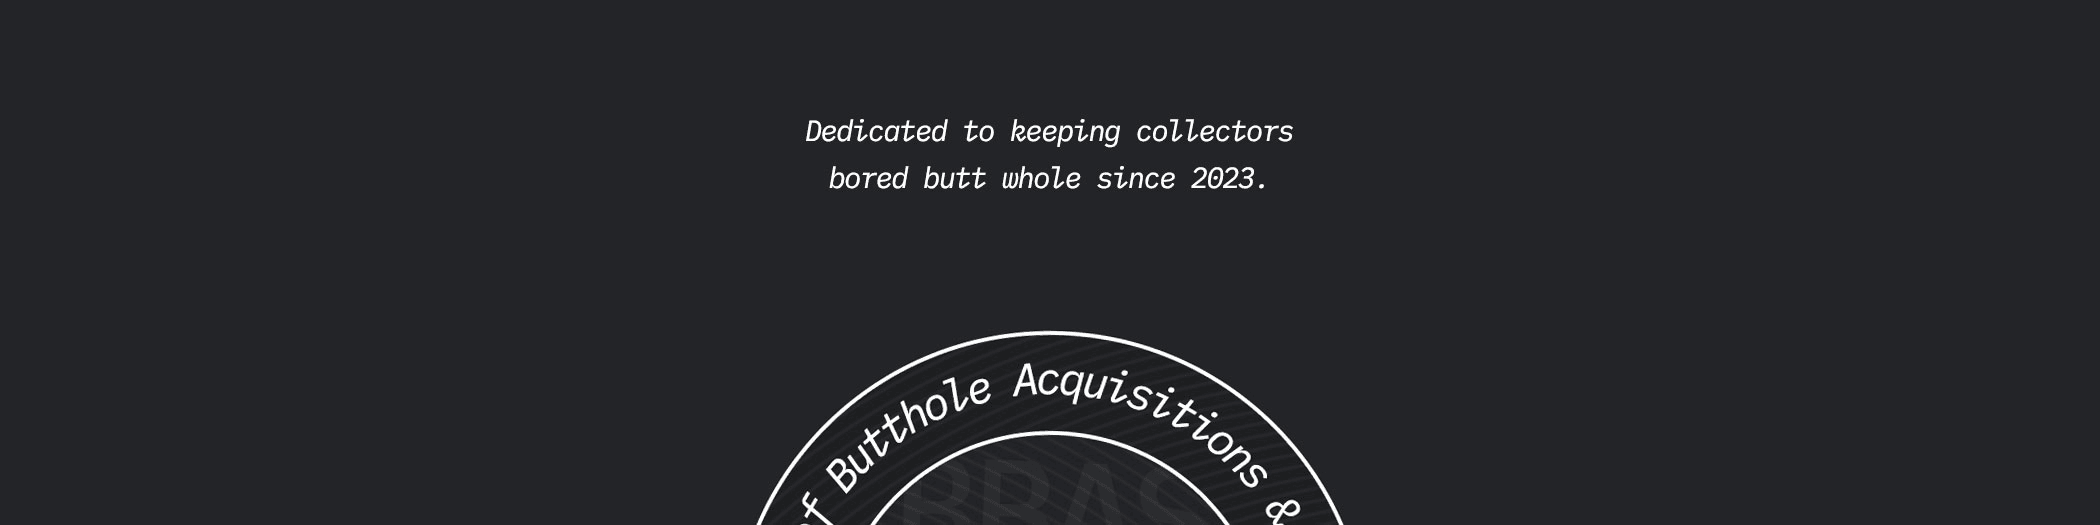 ButtholeAcquisitions バナー